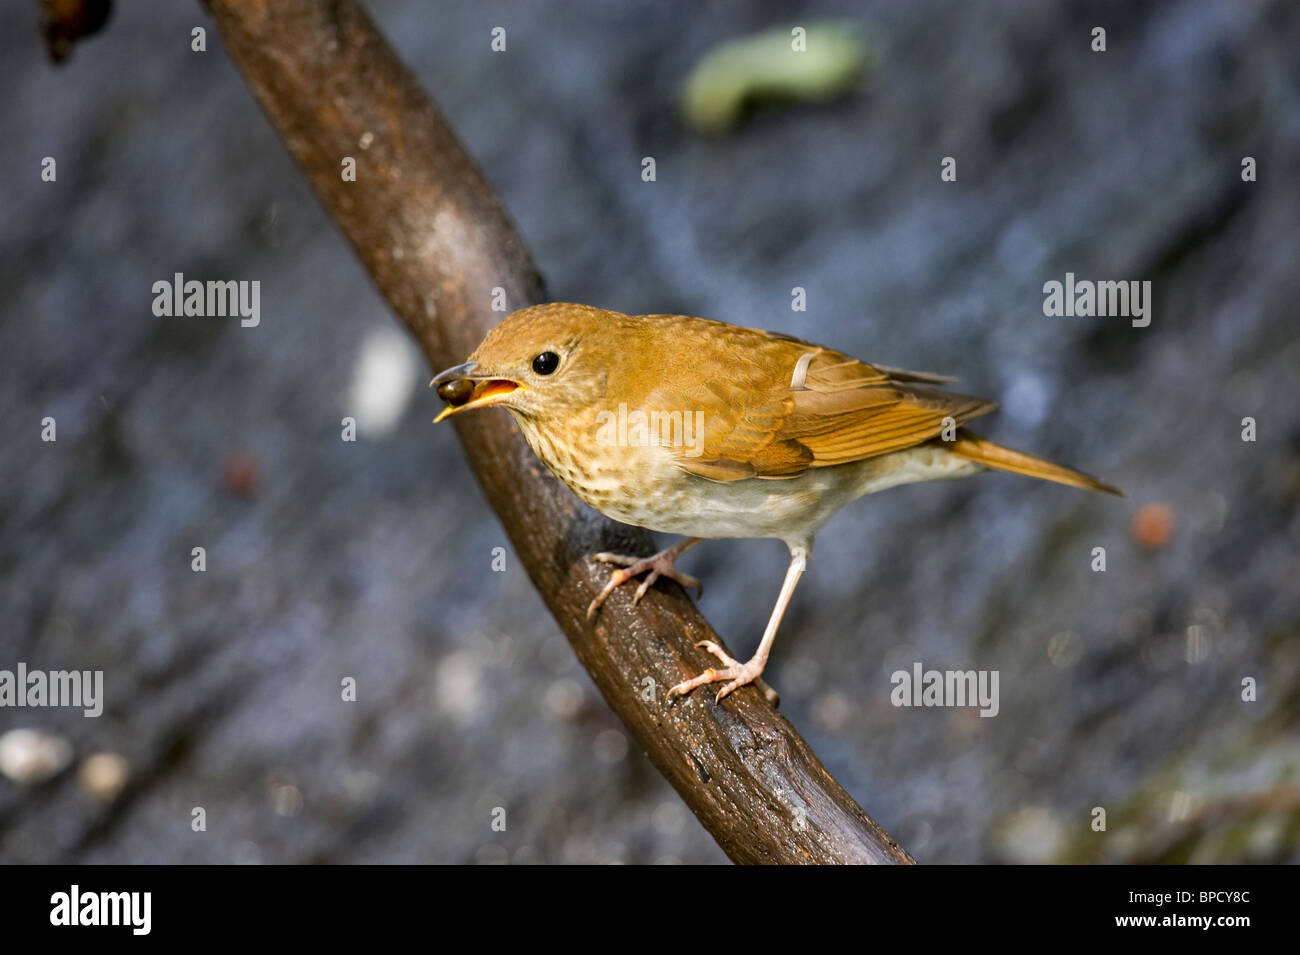 Veery Perched on a Branch Expelling a Seed Stock Photo